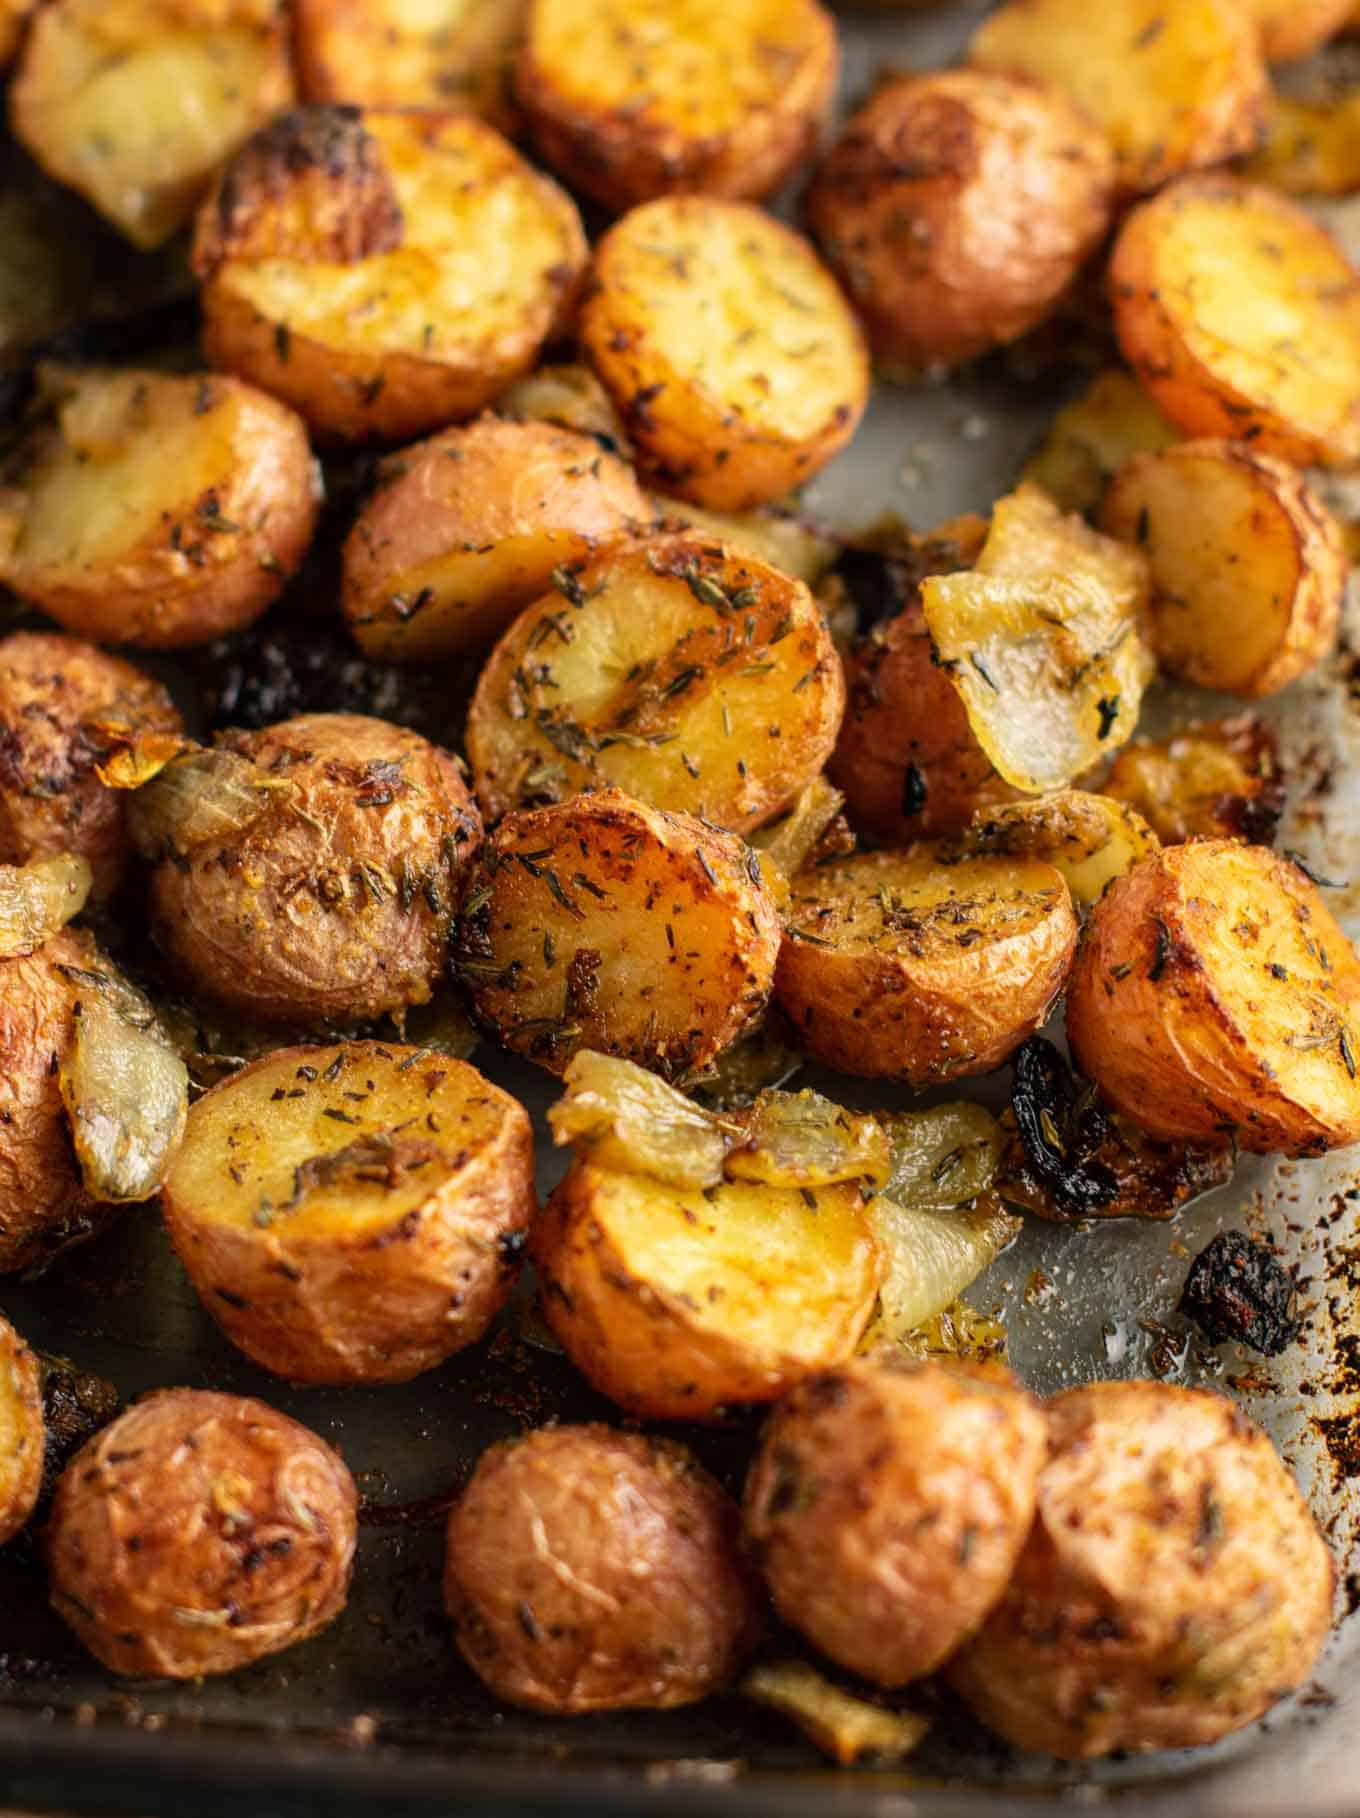 Easy roasted potatoes and onions – delicious side dish! #potatoesandonions #sidedish #potatoes #dinner